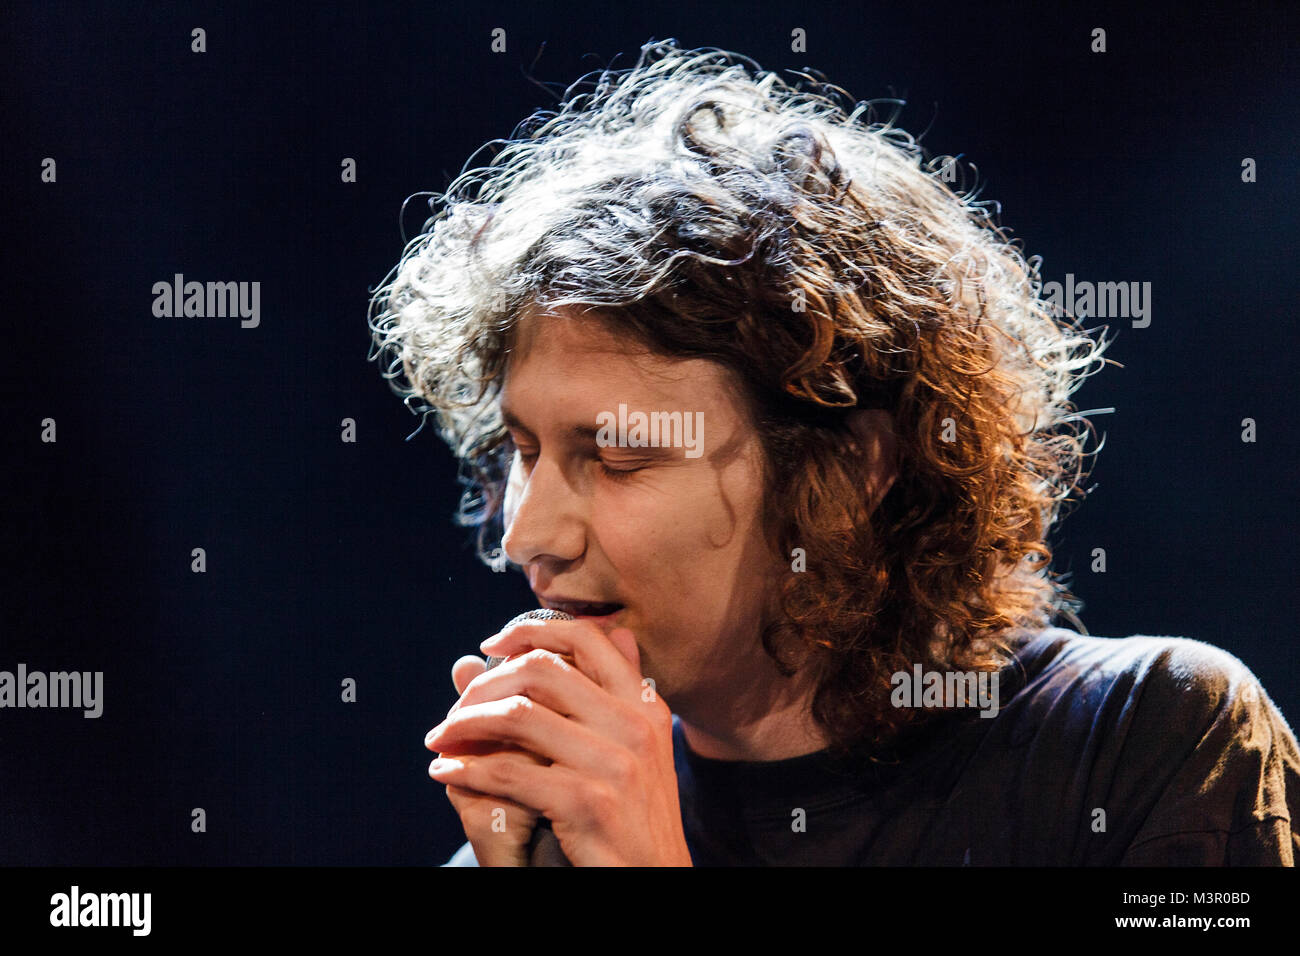 The Danish electro pop band M.I.L.K. performs a concert the Danish music and showcase festival Spot Festival 2016. Here singer Emil Wilk is seen live on stage. Denmark, 29/04 2016. Stock Photo